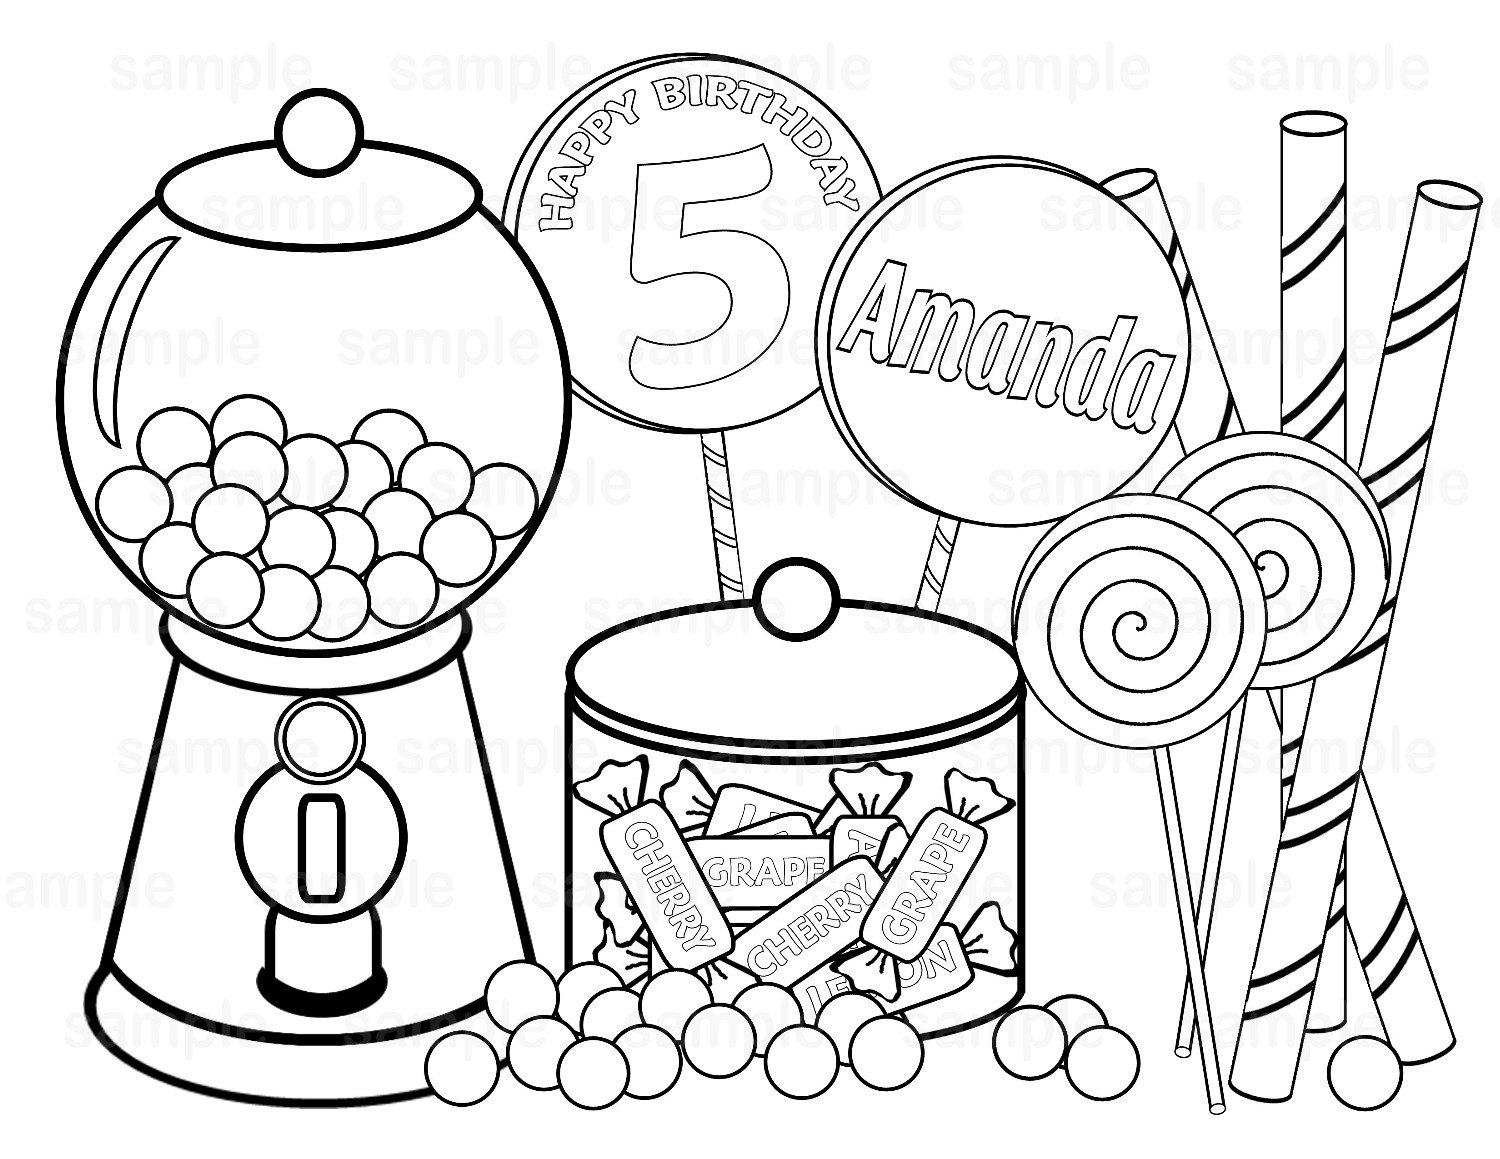 Candyland Characters Coloring Pages Custom Candyland Coloring Pages